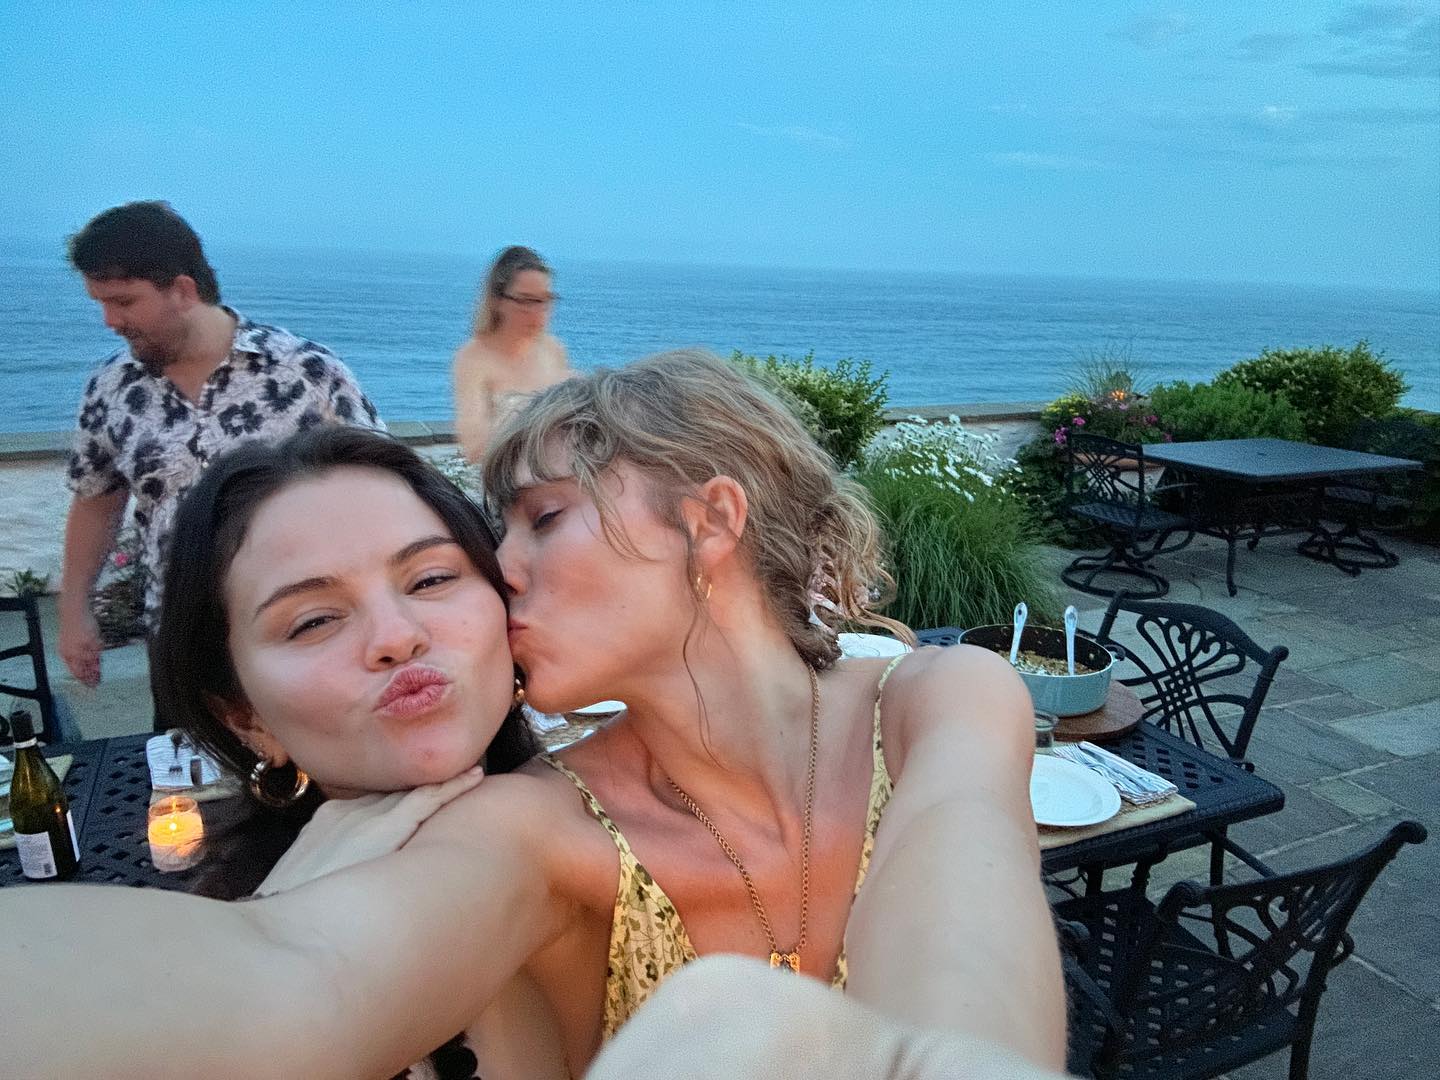 Selena and Taylor Swift are longtime friends, despite Taylor dating Selena's ex Taylor Lautner